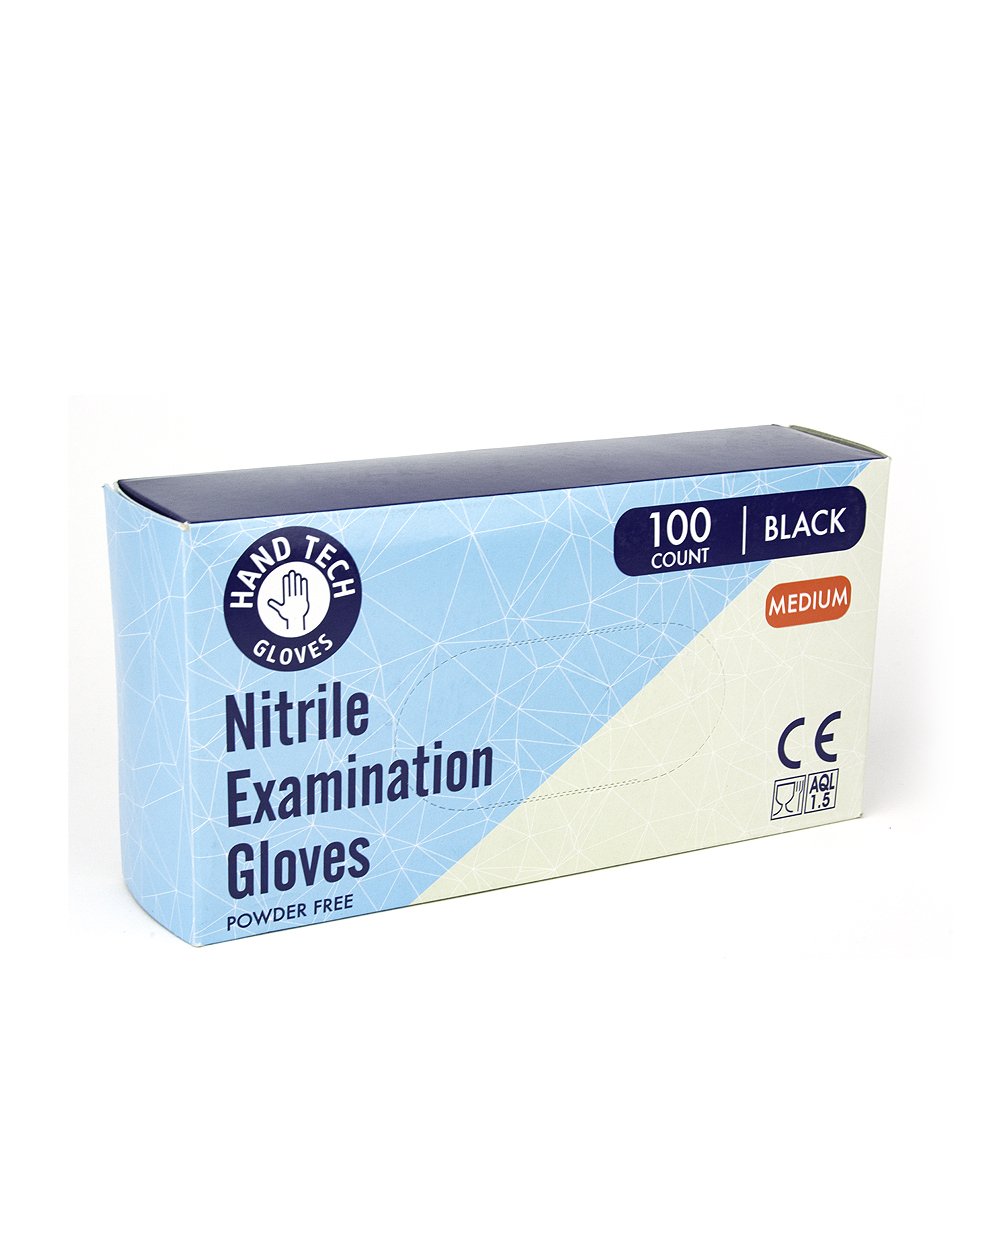 HAND TECH | Powder-Free Disposable Gloves | Black - Nitrile - 100 Count - 5